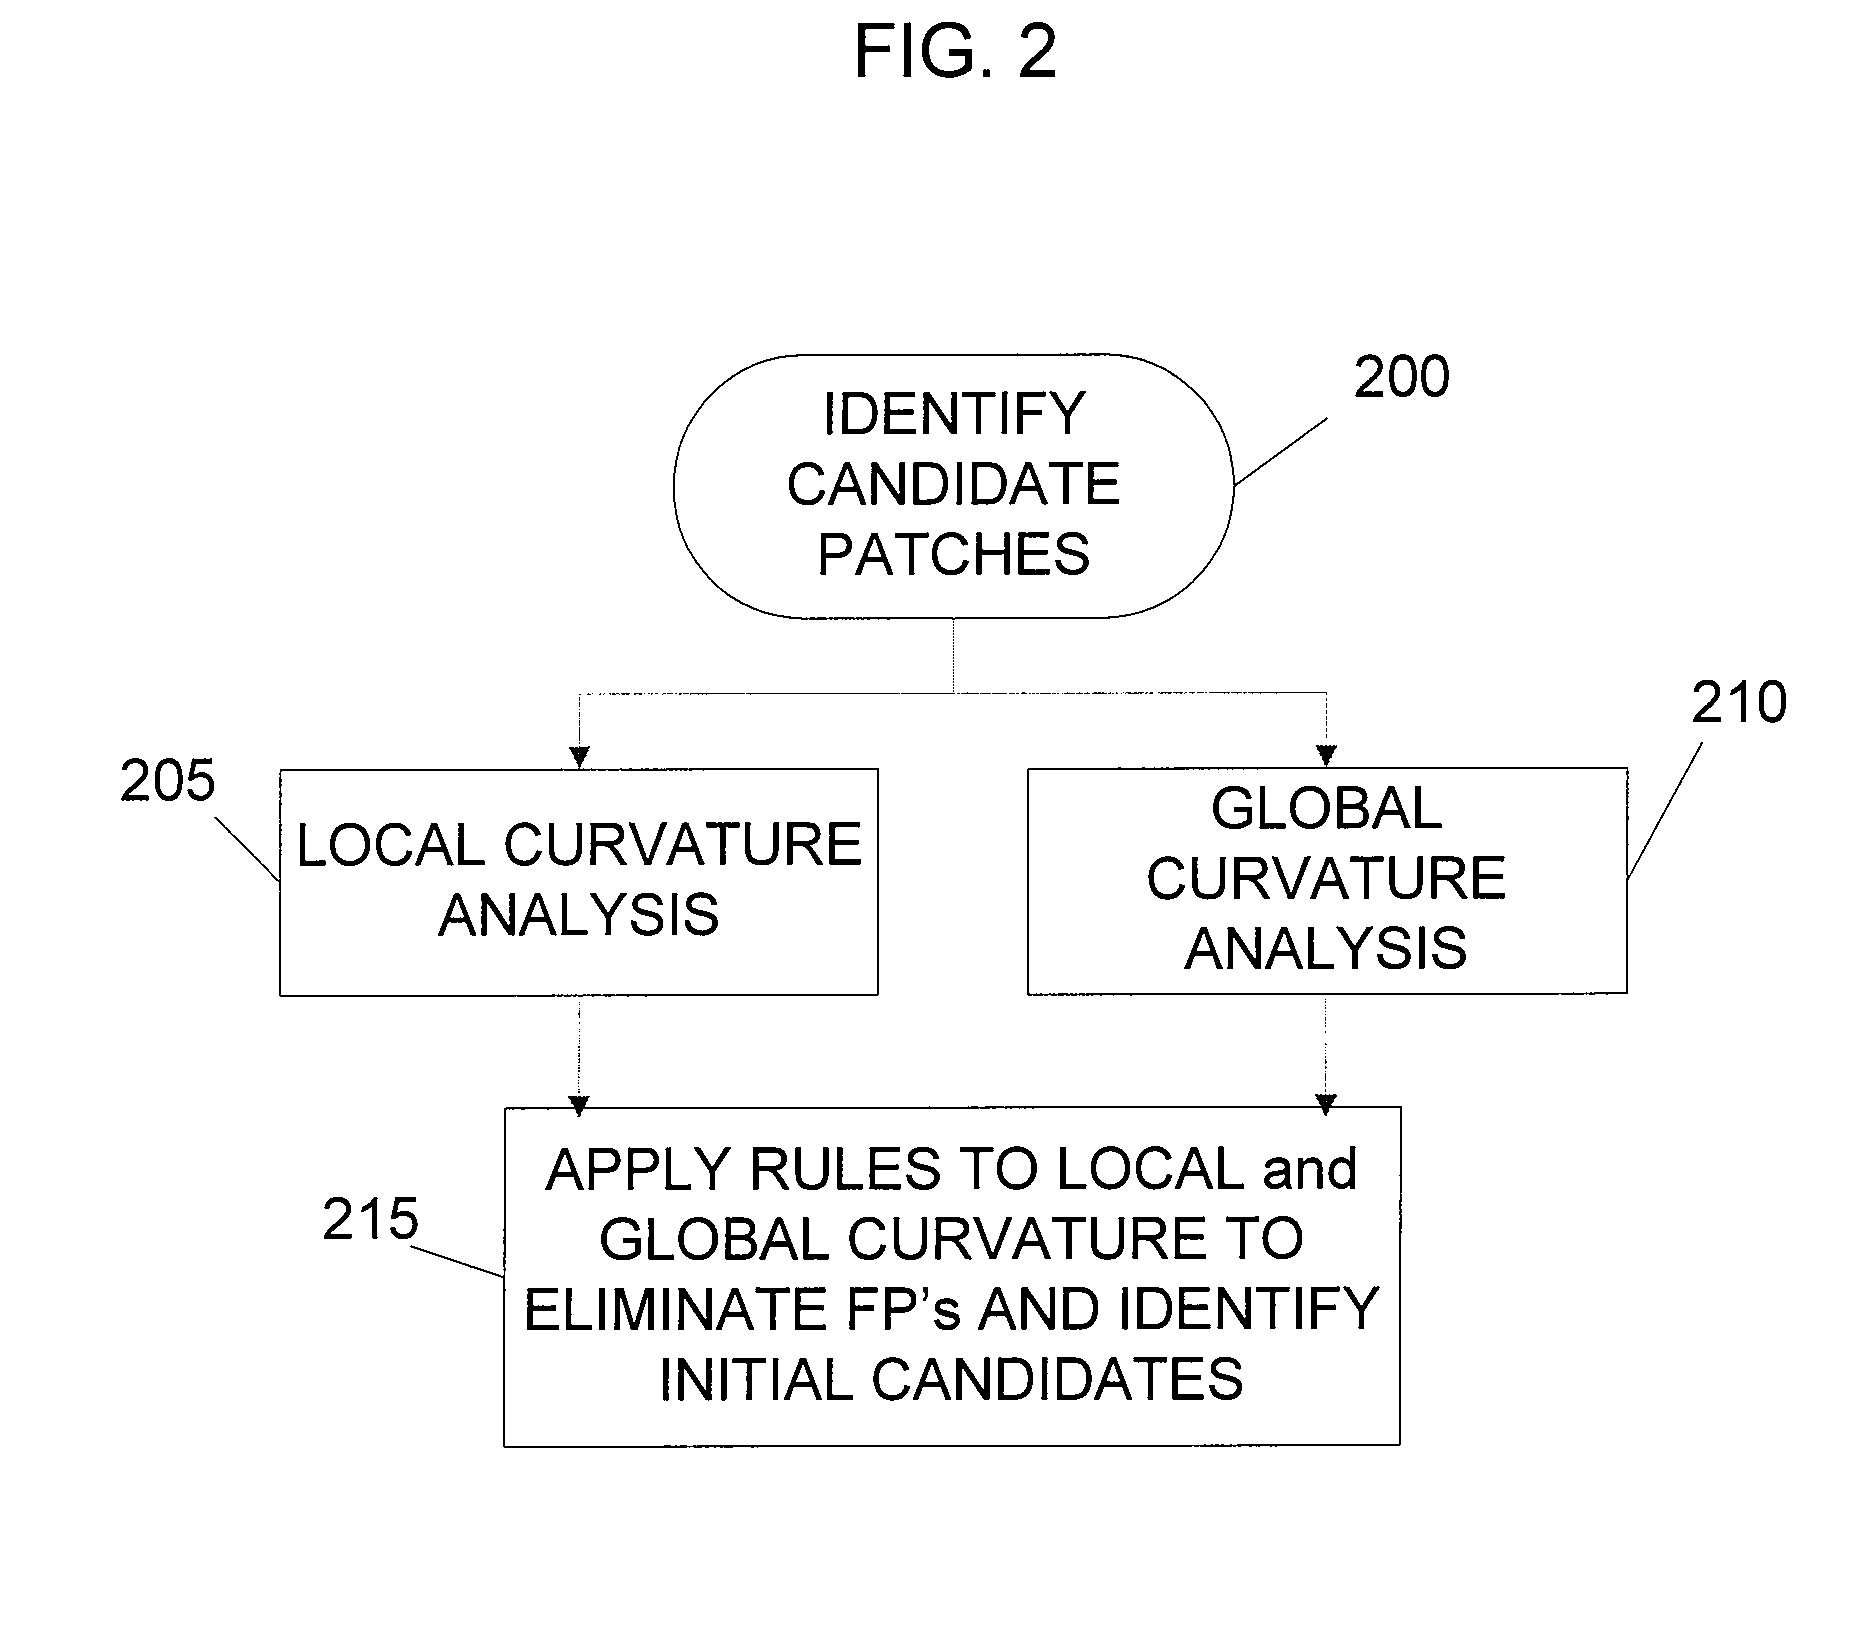 System and method for reduction of false positives during computer aided polyp detection